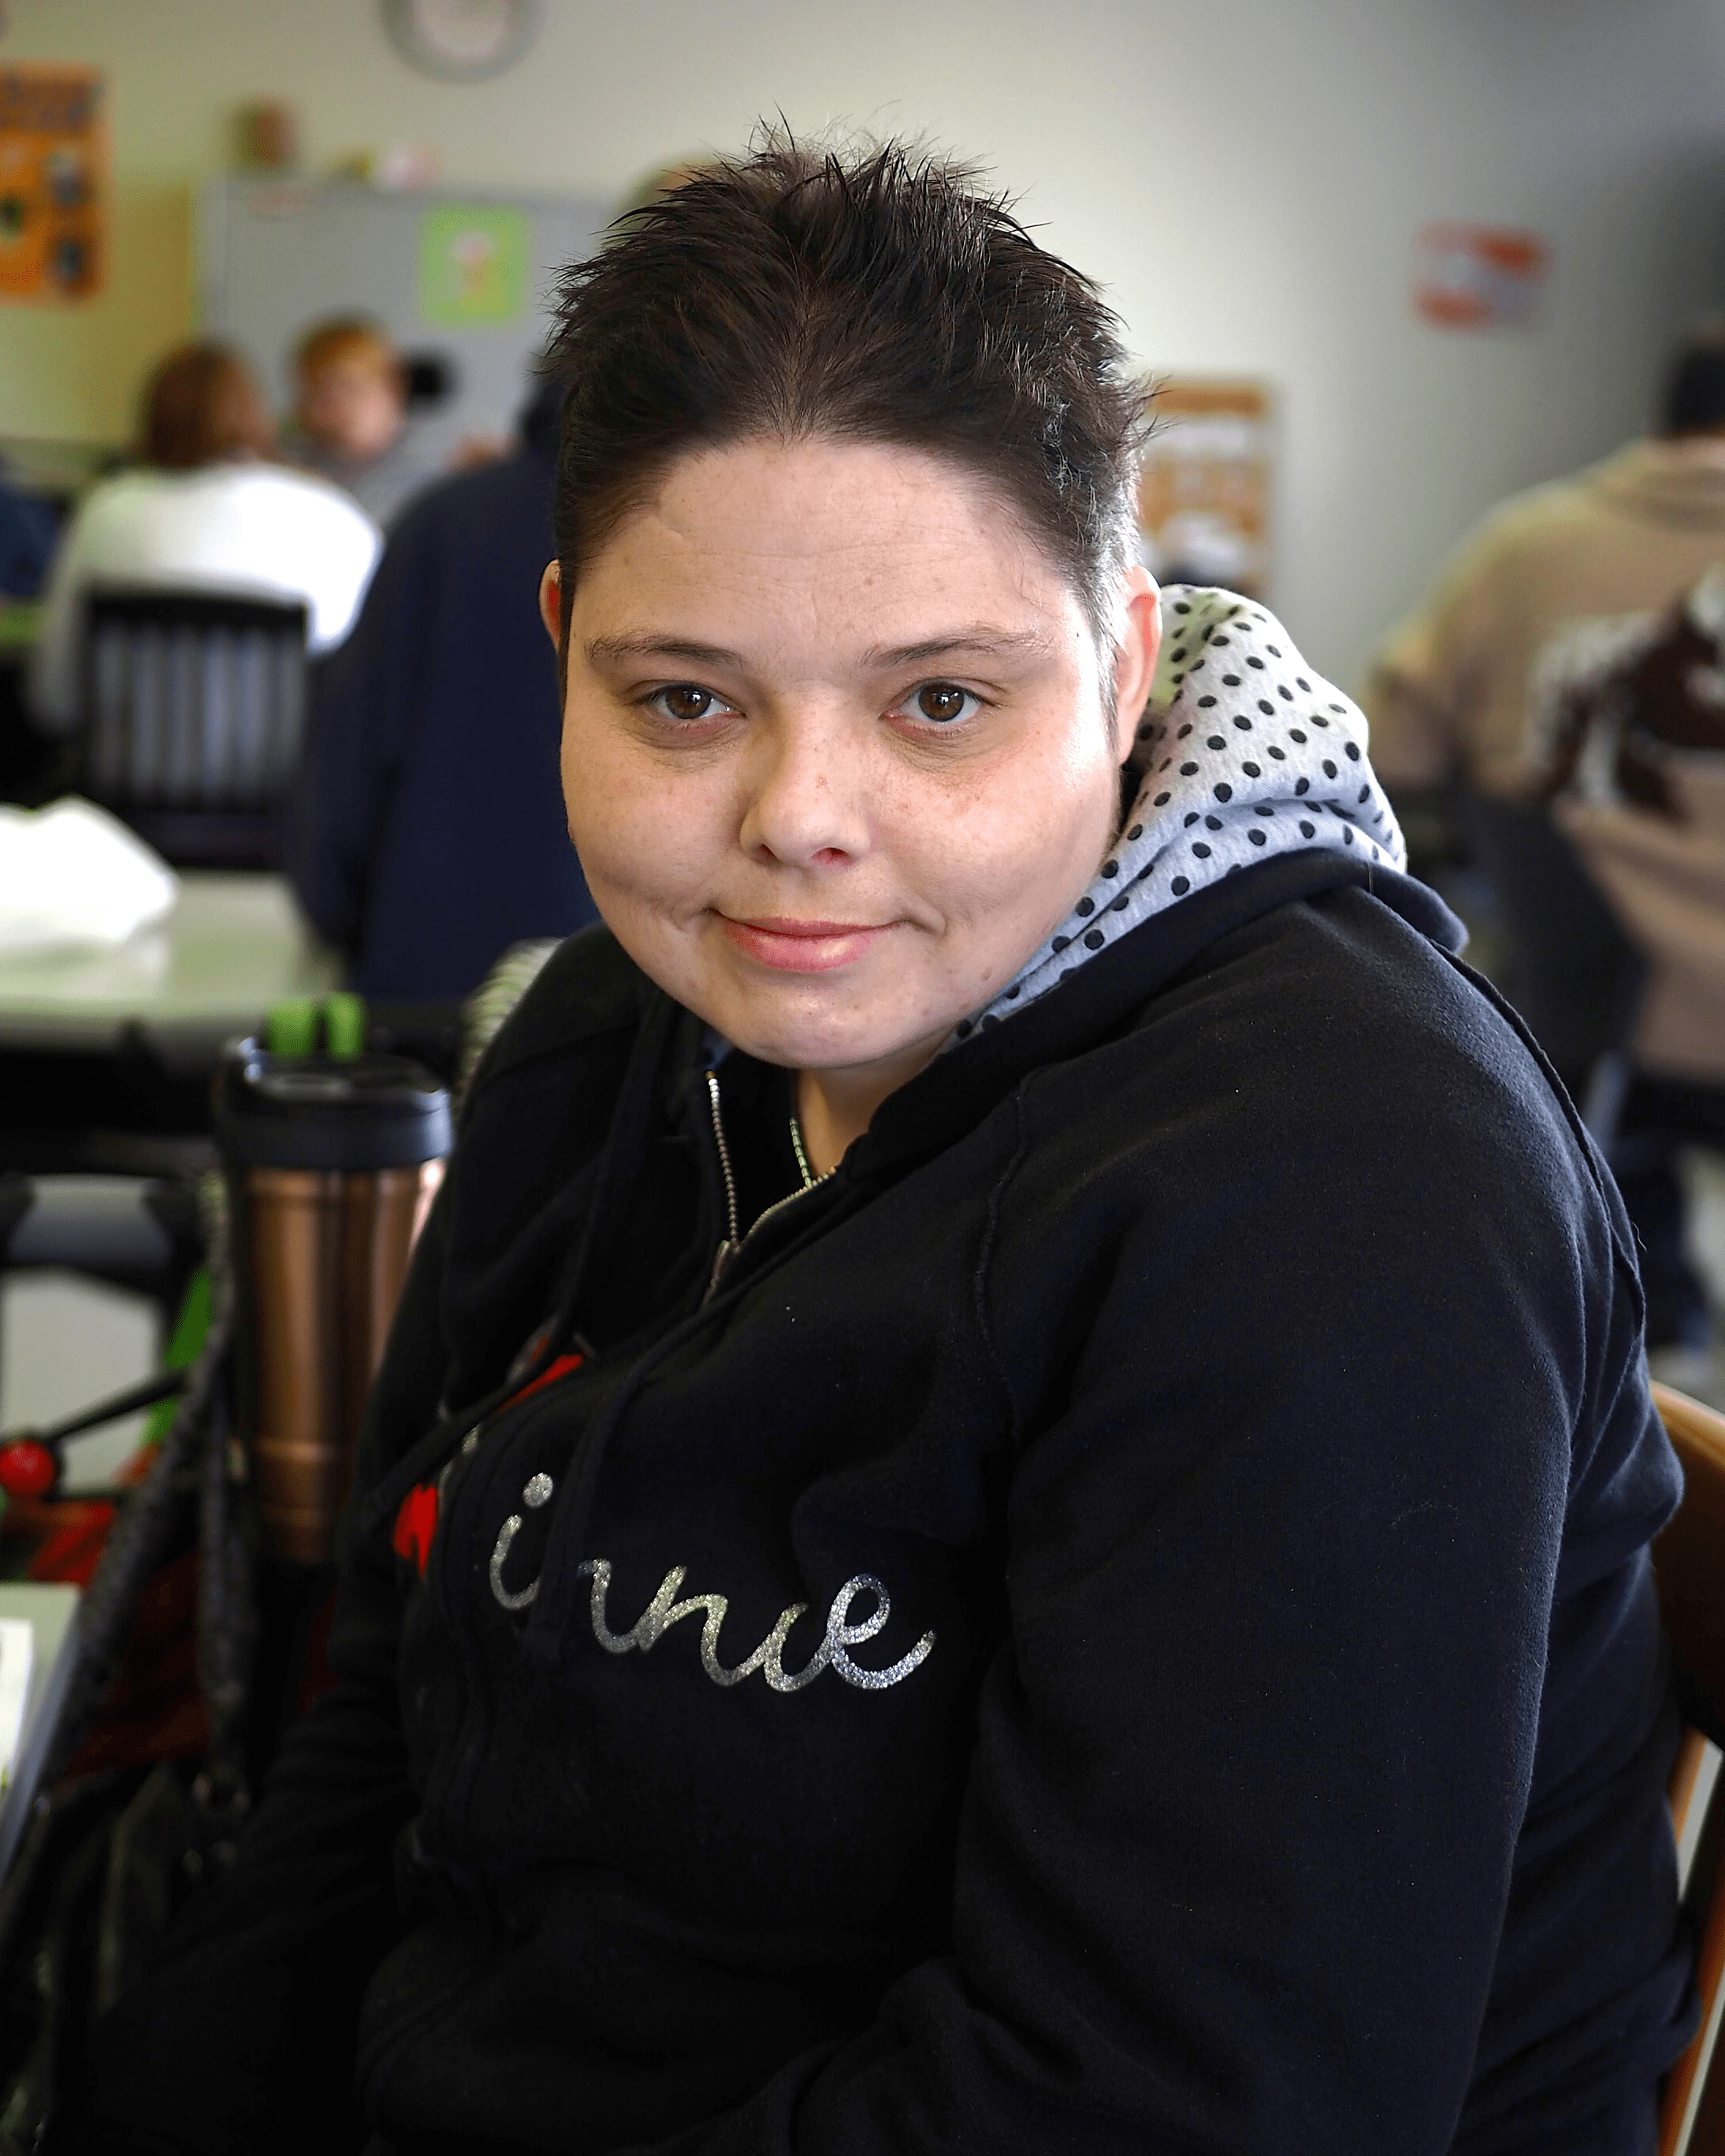 A woman wearing a black sweatshirt is smiling at the camera.